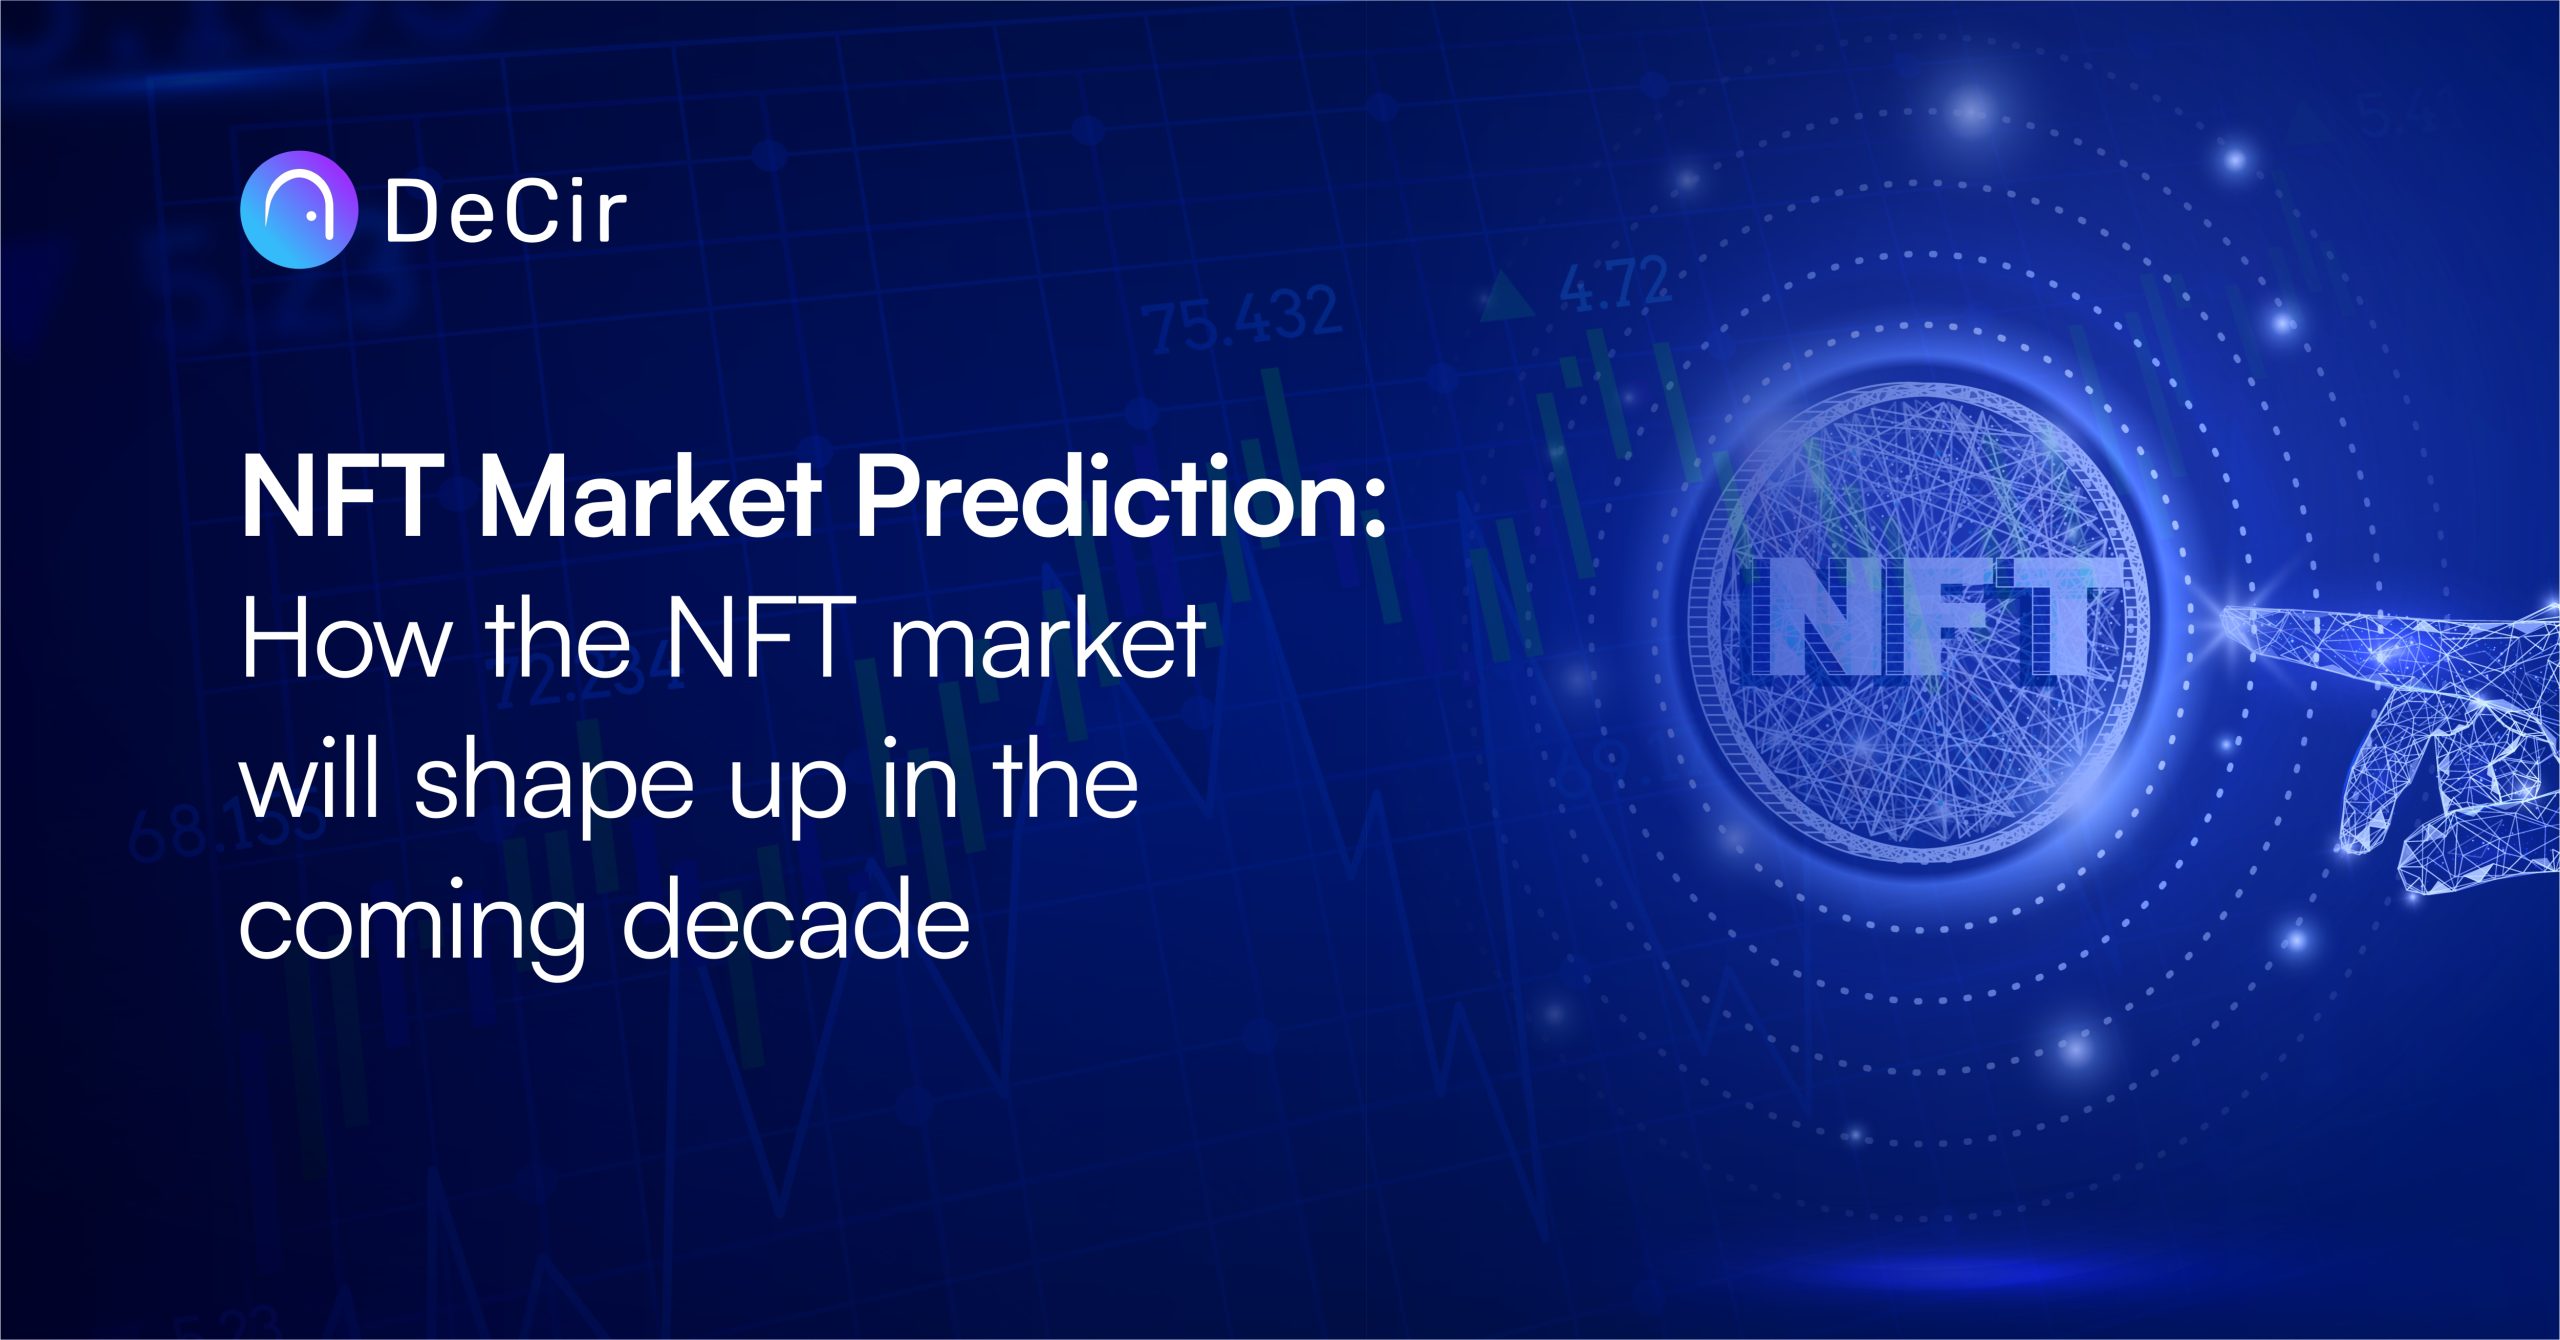 NFT Market Prediction: How the NFT market will shape up in the coming decade